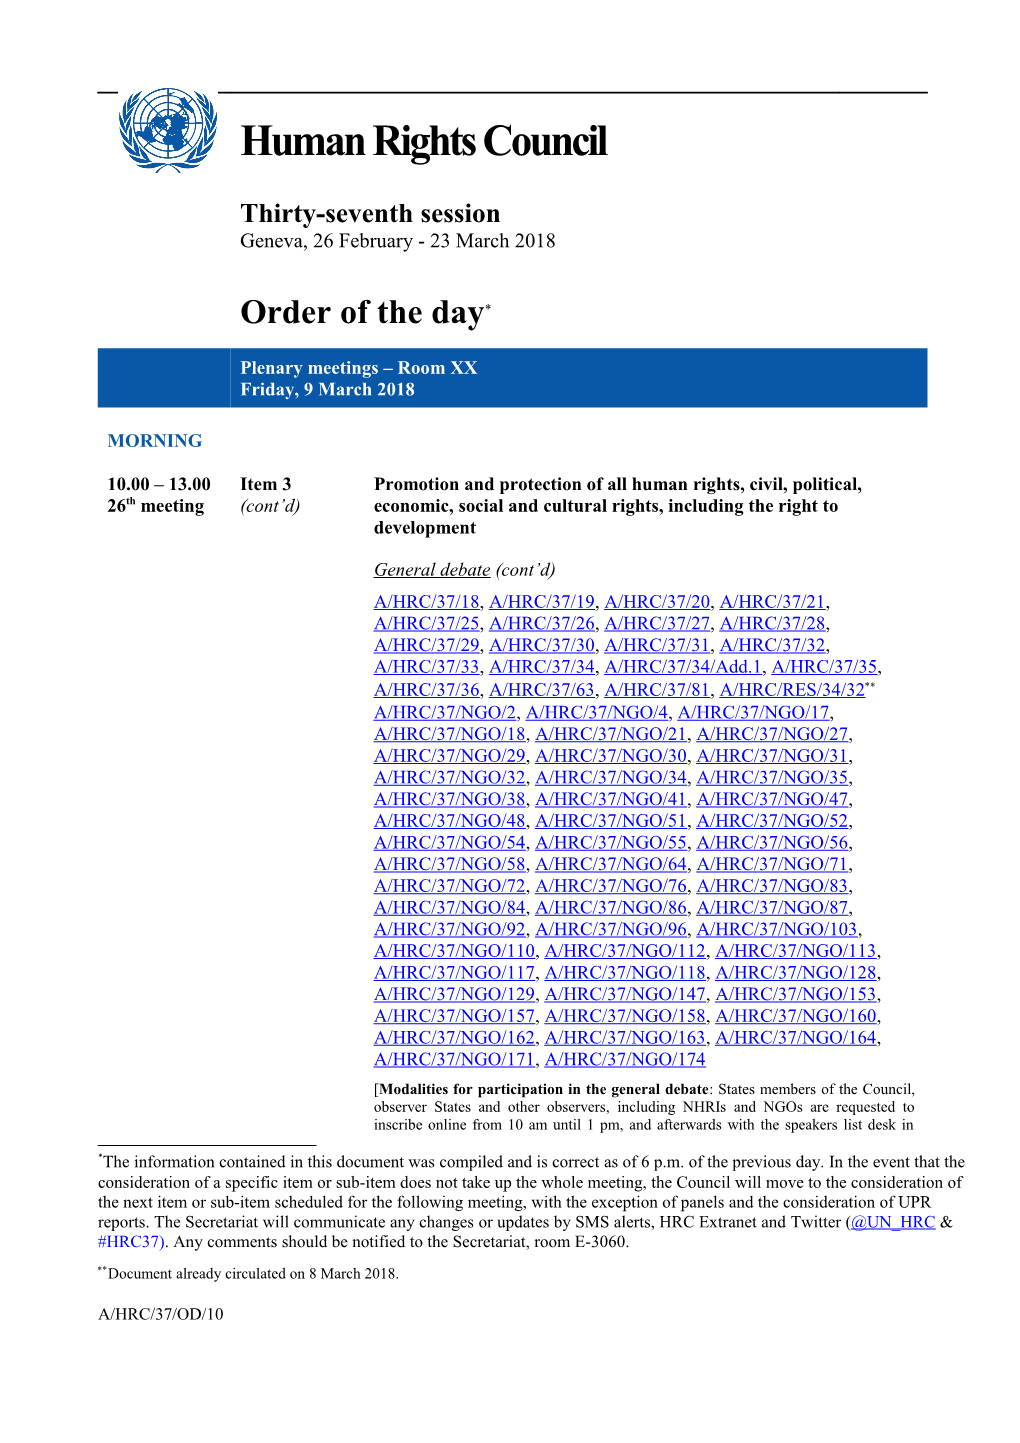 Order of the Day, Friday 9 March 2018